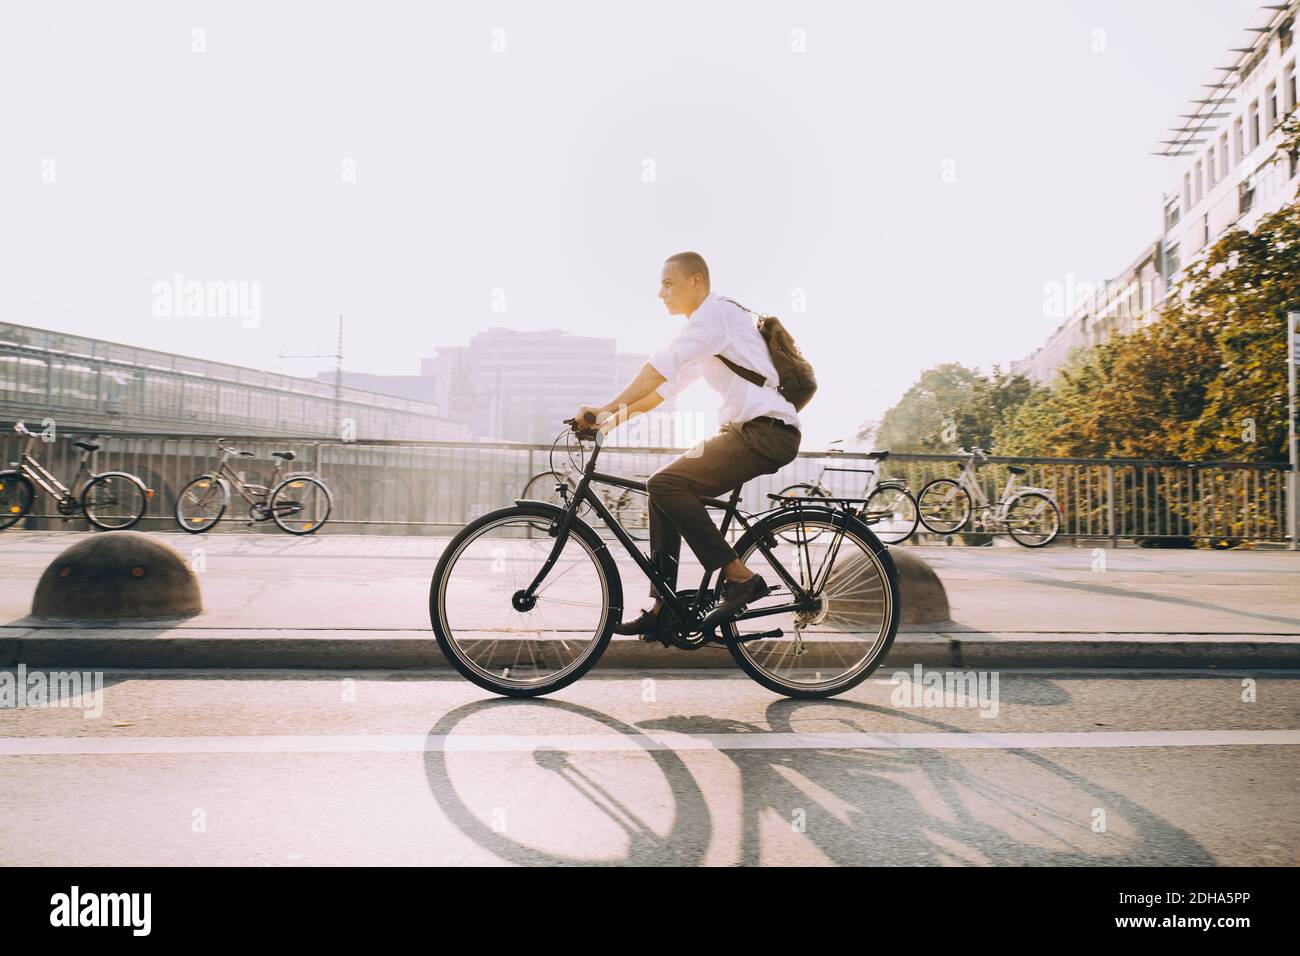 Full length of businessman riding bicycle on street in city against sky Stock Photo